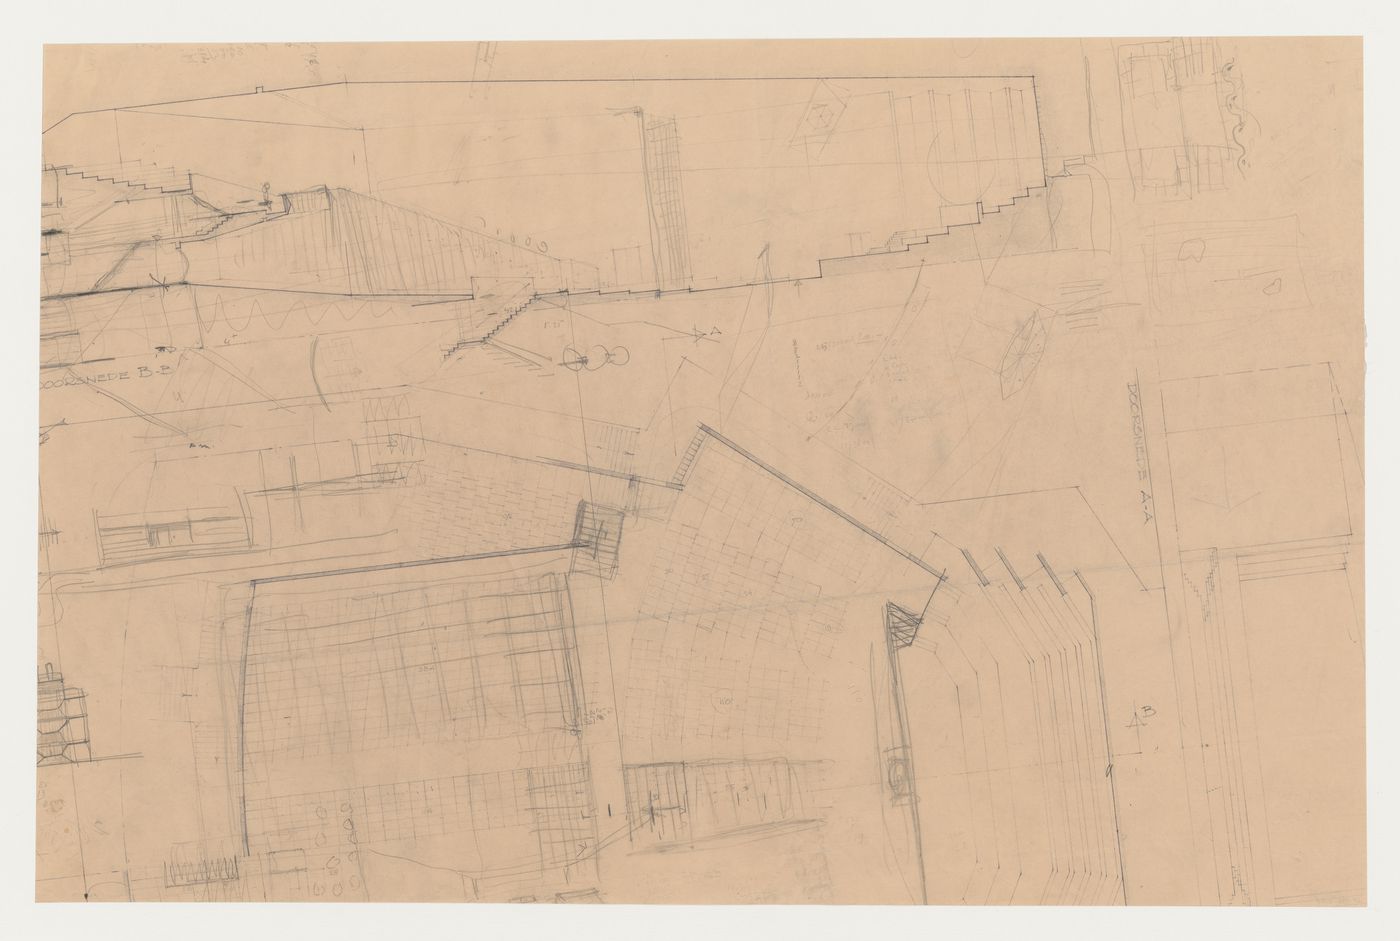 Plan, sections and details for an open-air theatre in the Urals, Soviet Union (now Kazakhstan)